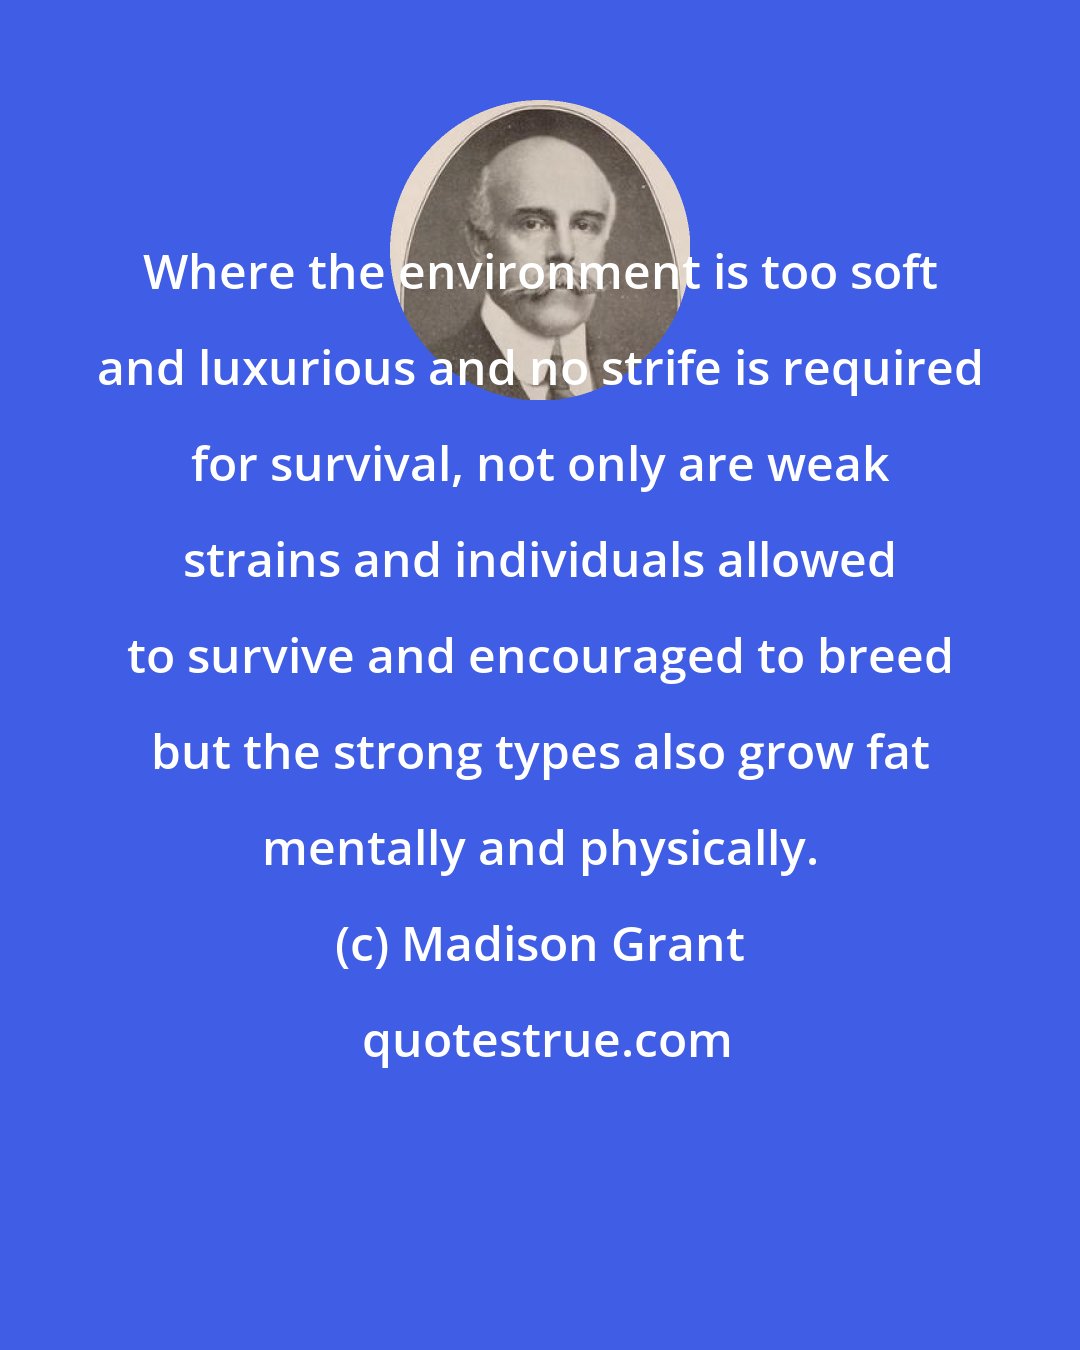 Madison Grant: Where the environment is too soft and luxurious and no strife is required for survival, not only are weak strains and individuals allowed to survive and encouraged to breed but the strong types also grow fat mentally and physically.